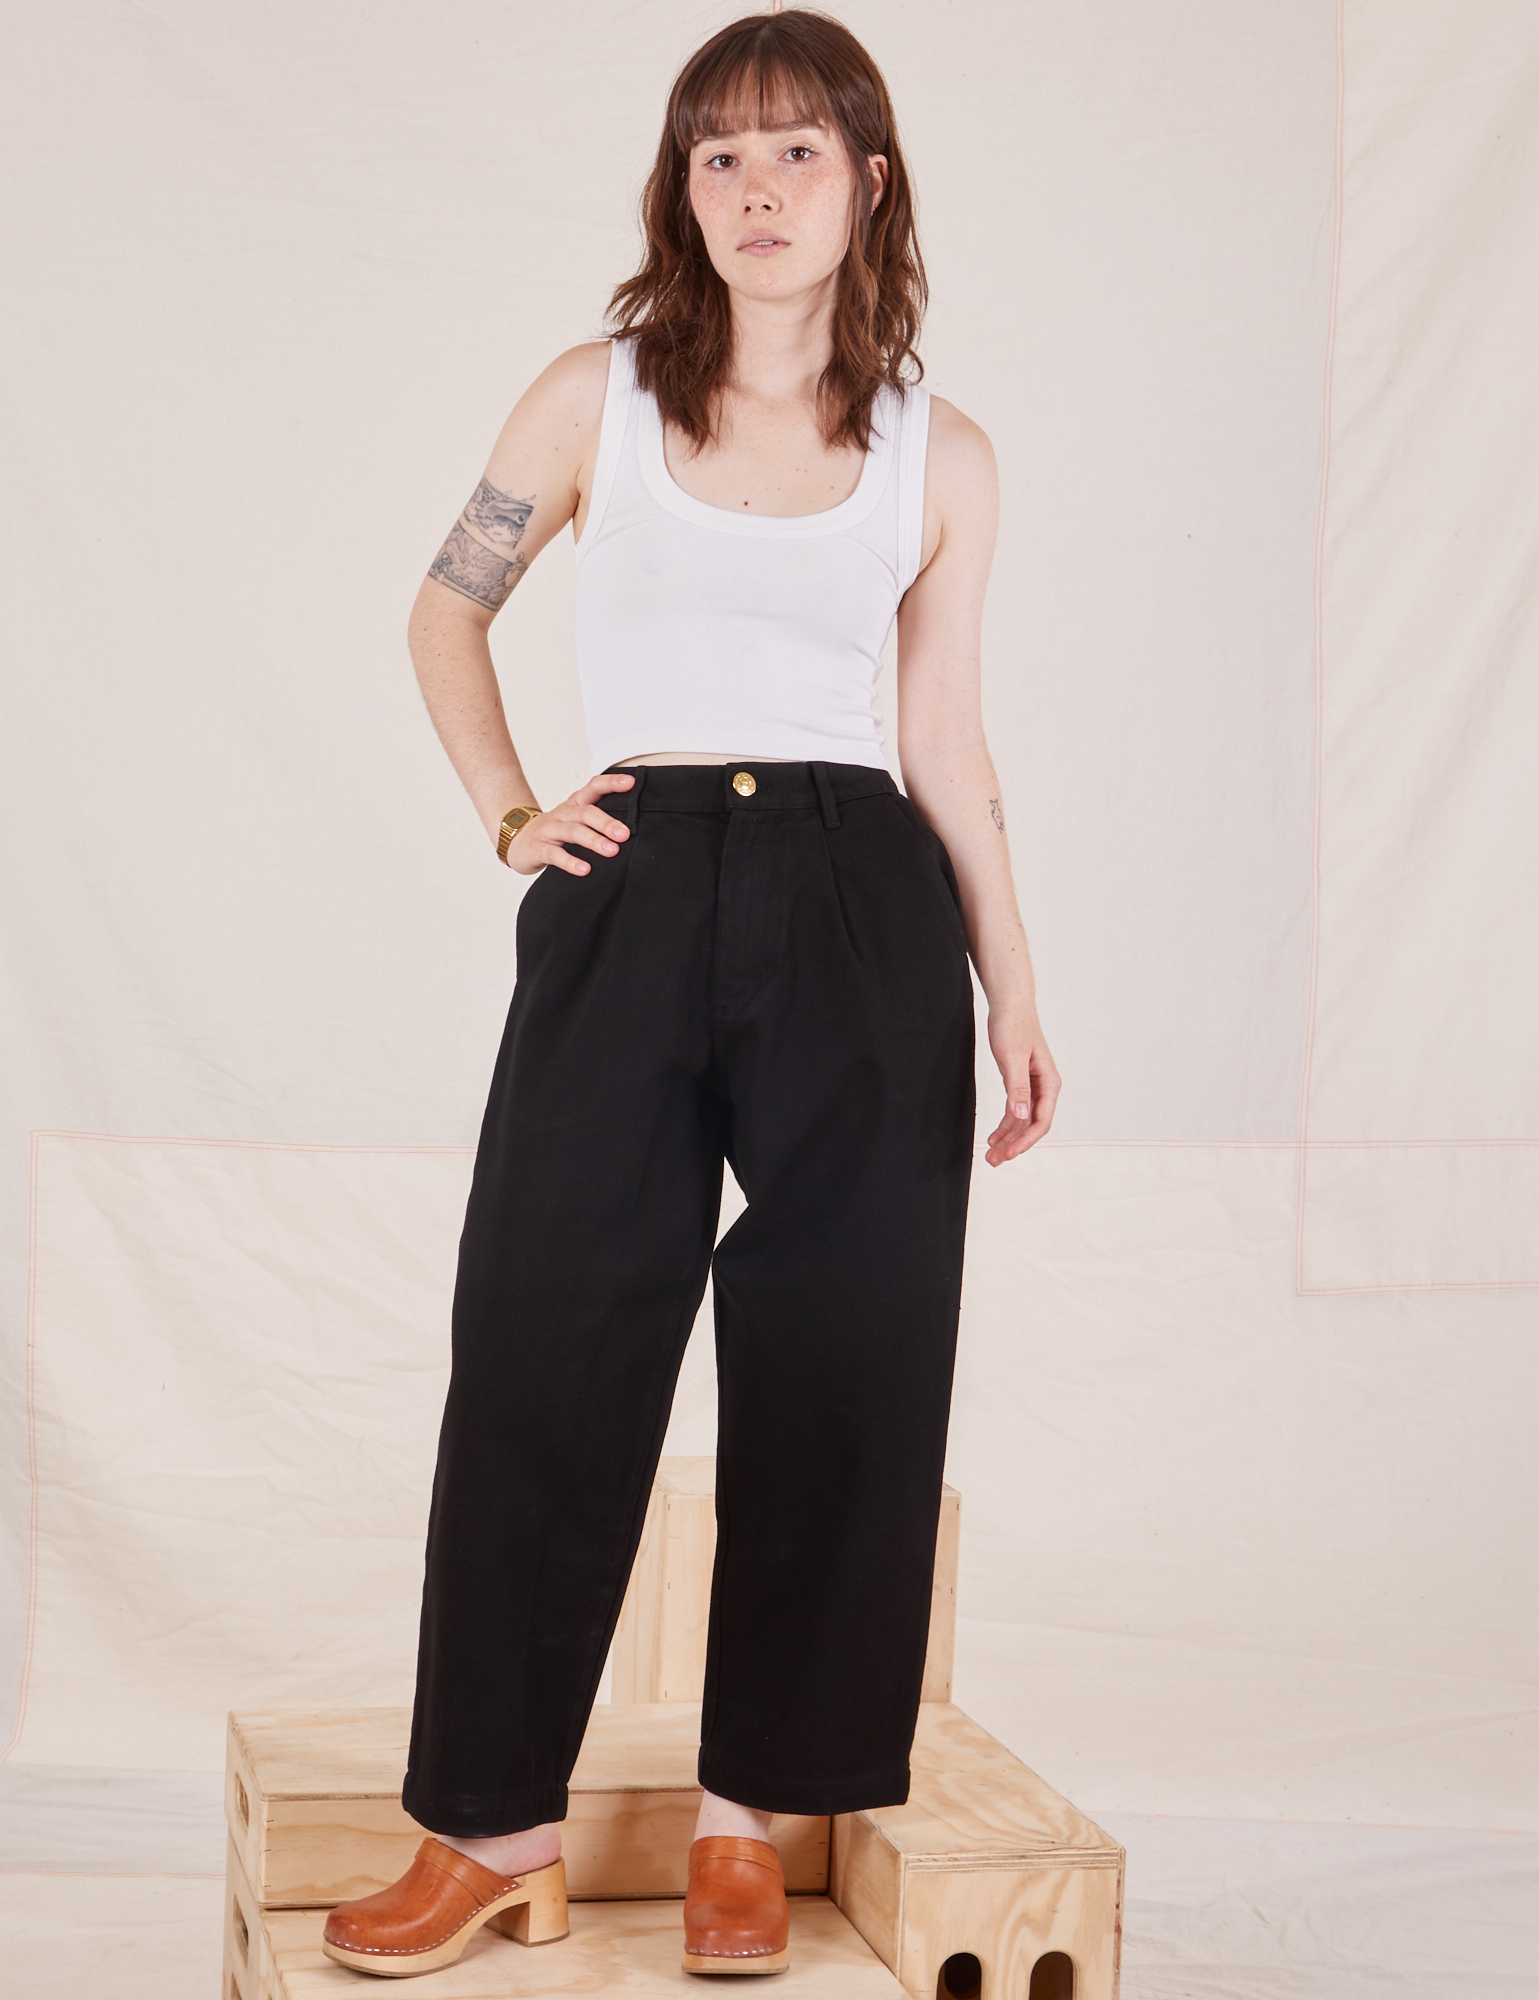 Hana is 5&#39;3&quot; and wearing XXS Petite Denim Trouser Jeans in Black paired with vintage off-white Cropped Tank Top